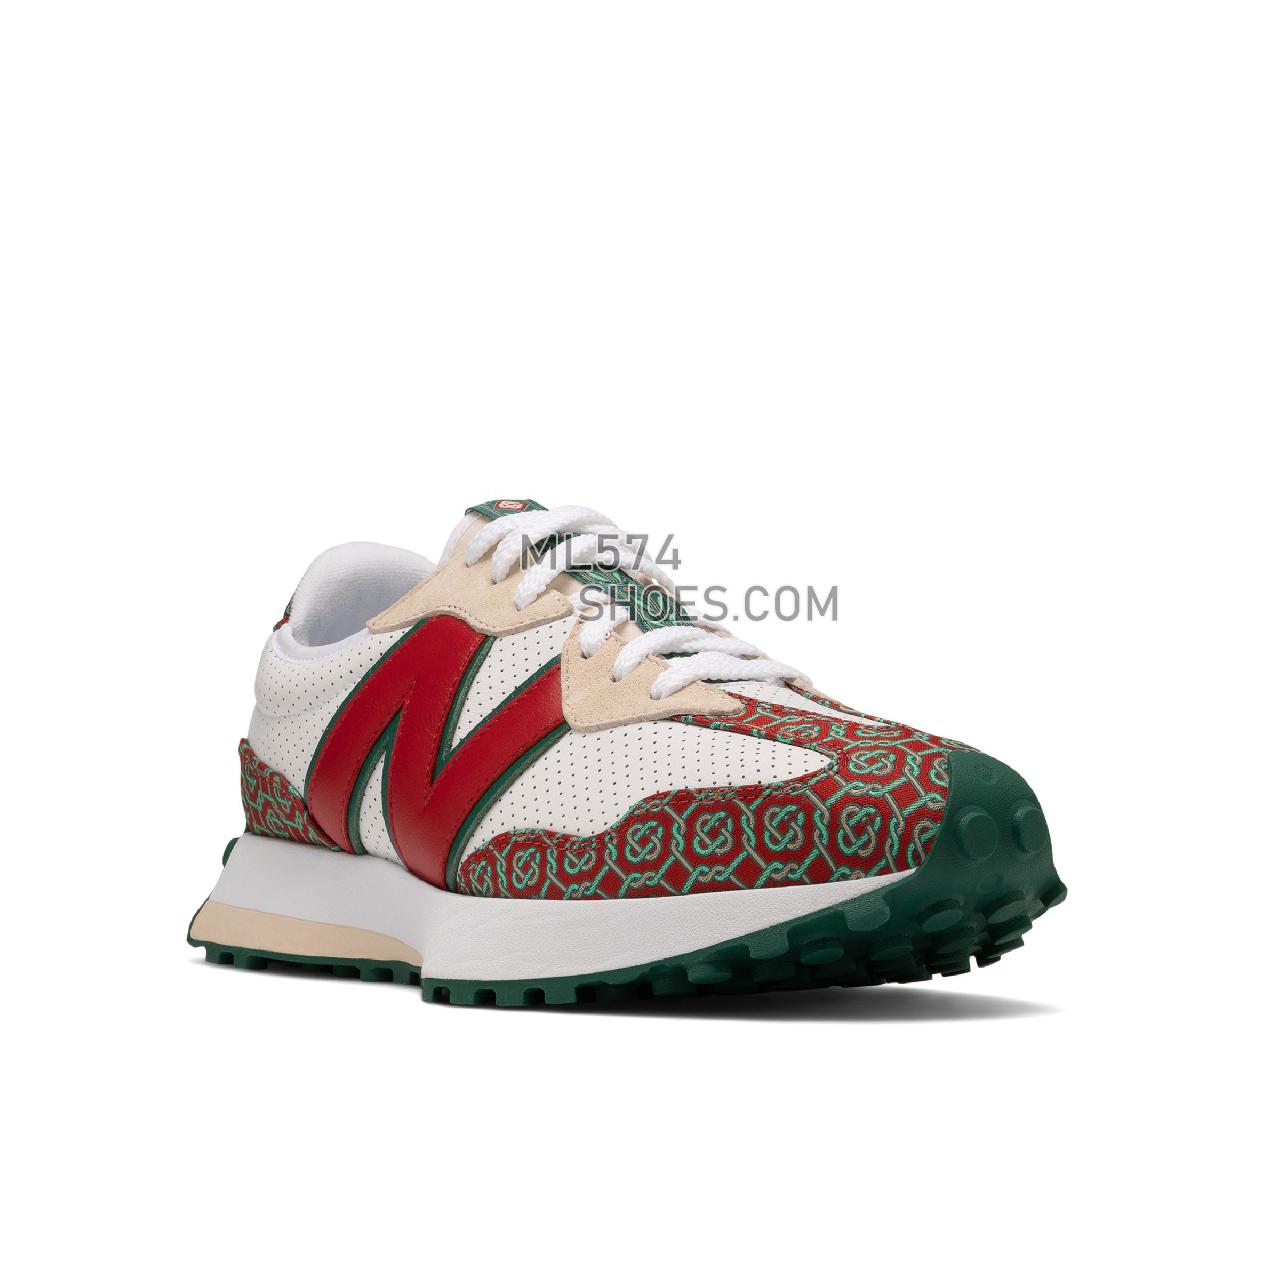 New Balance 327 - Unisex Men's Women's Sport Style Sneakers - Evergreen with Samba and White - MS327CAA